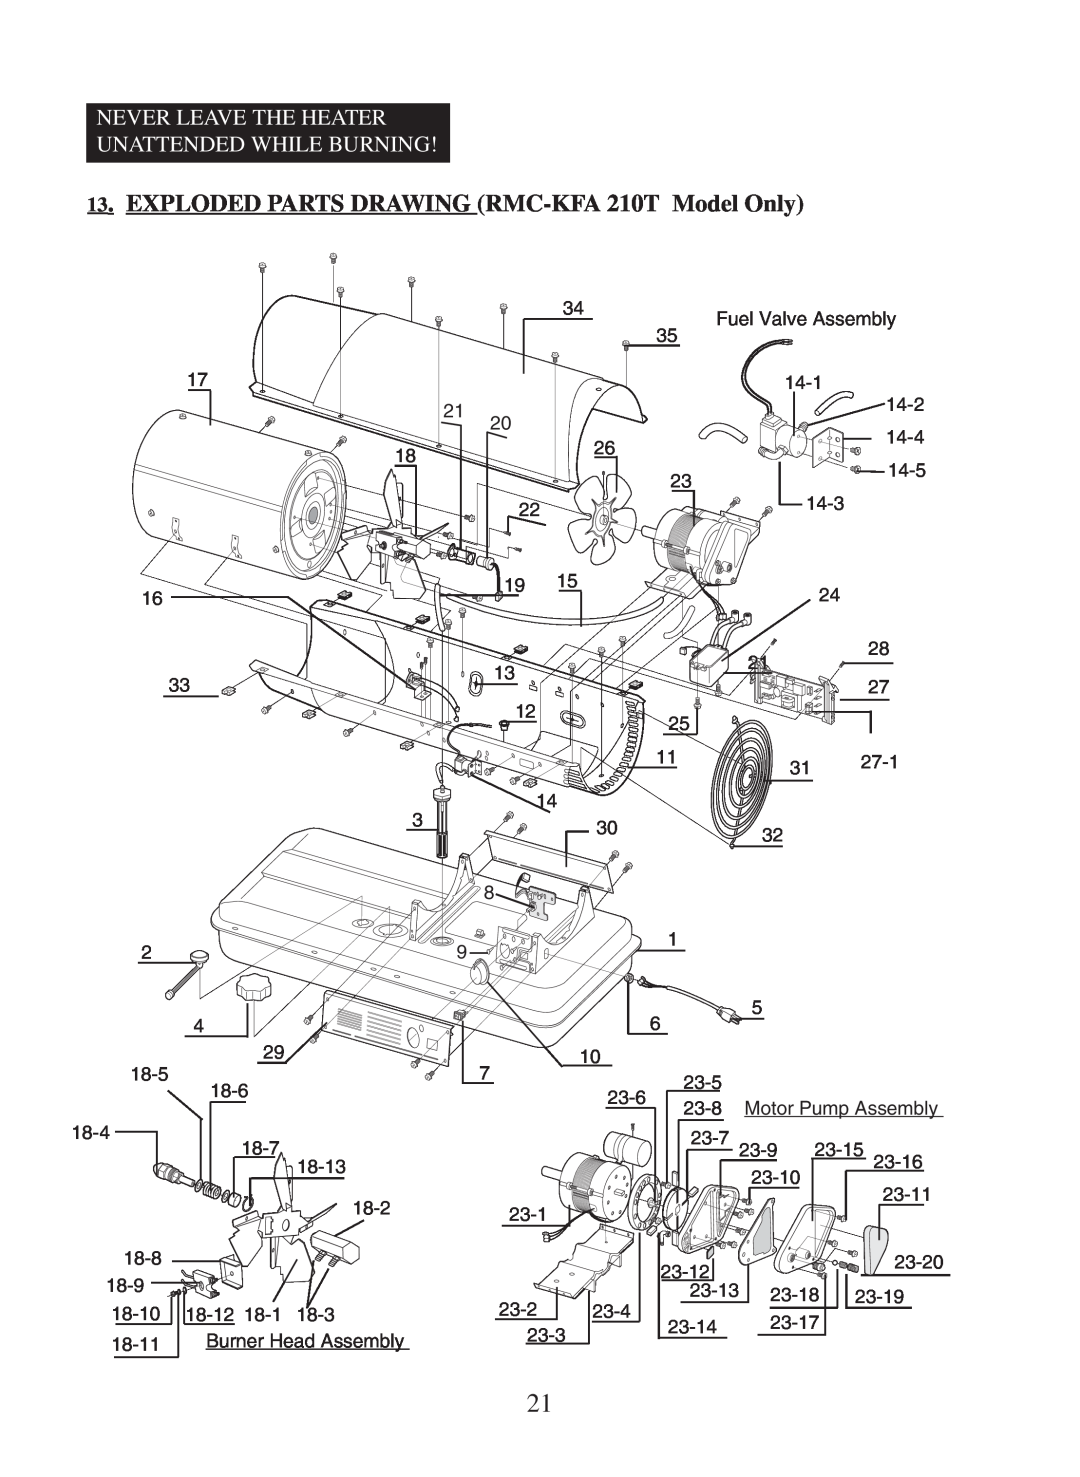 Dyna-Glo RMC-KFA65T EXPLODED PARTS DRAWING RMC-KFA210T Model Only, Never Leave The Heater Unattended While Burning 